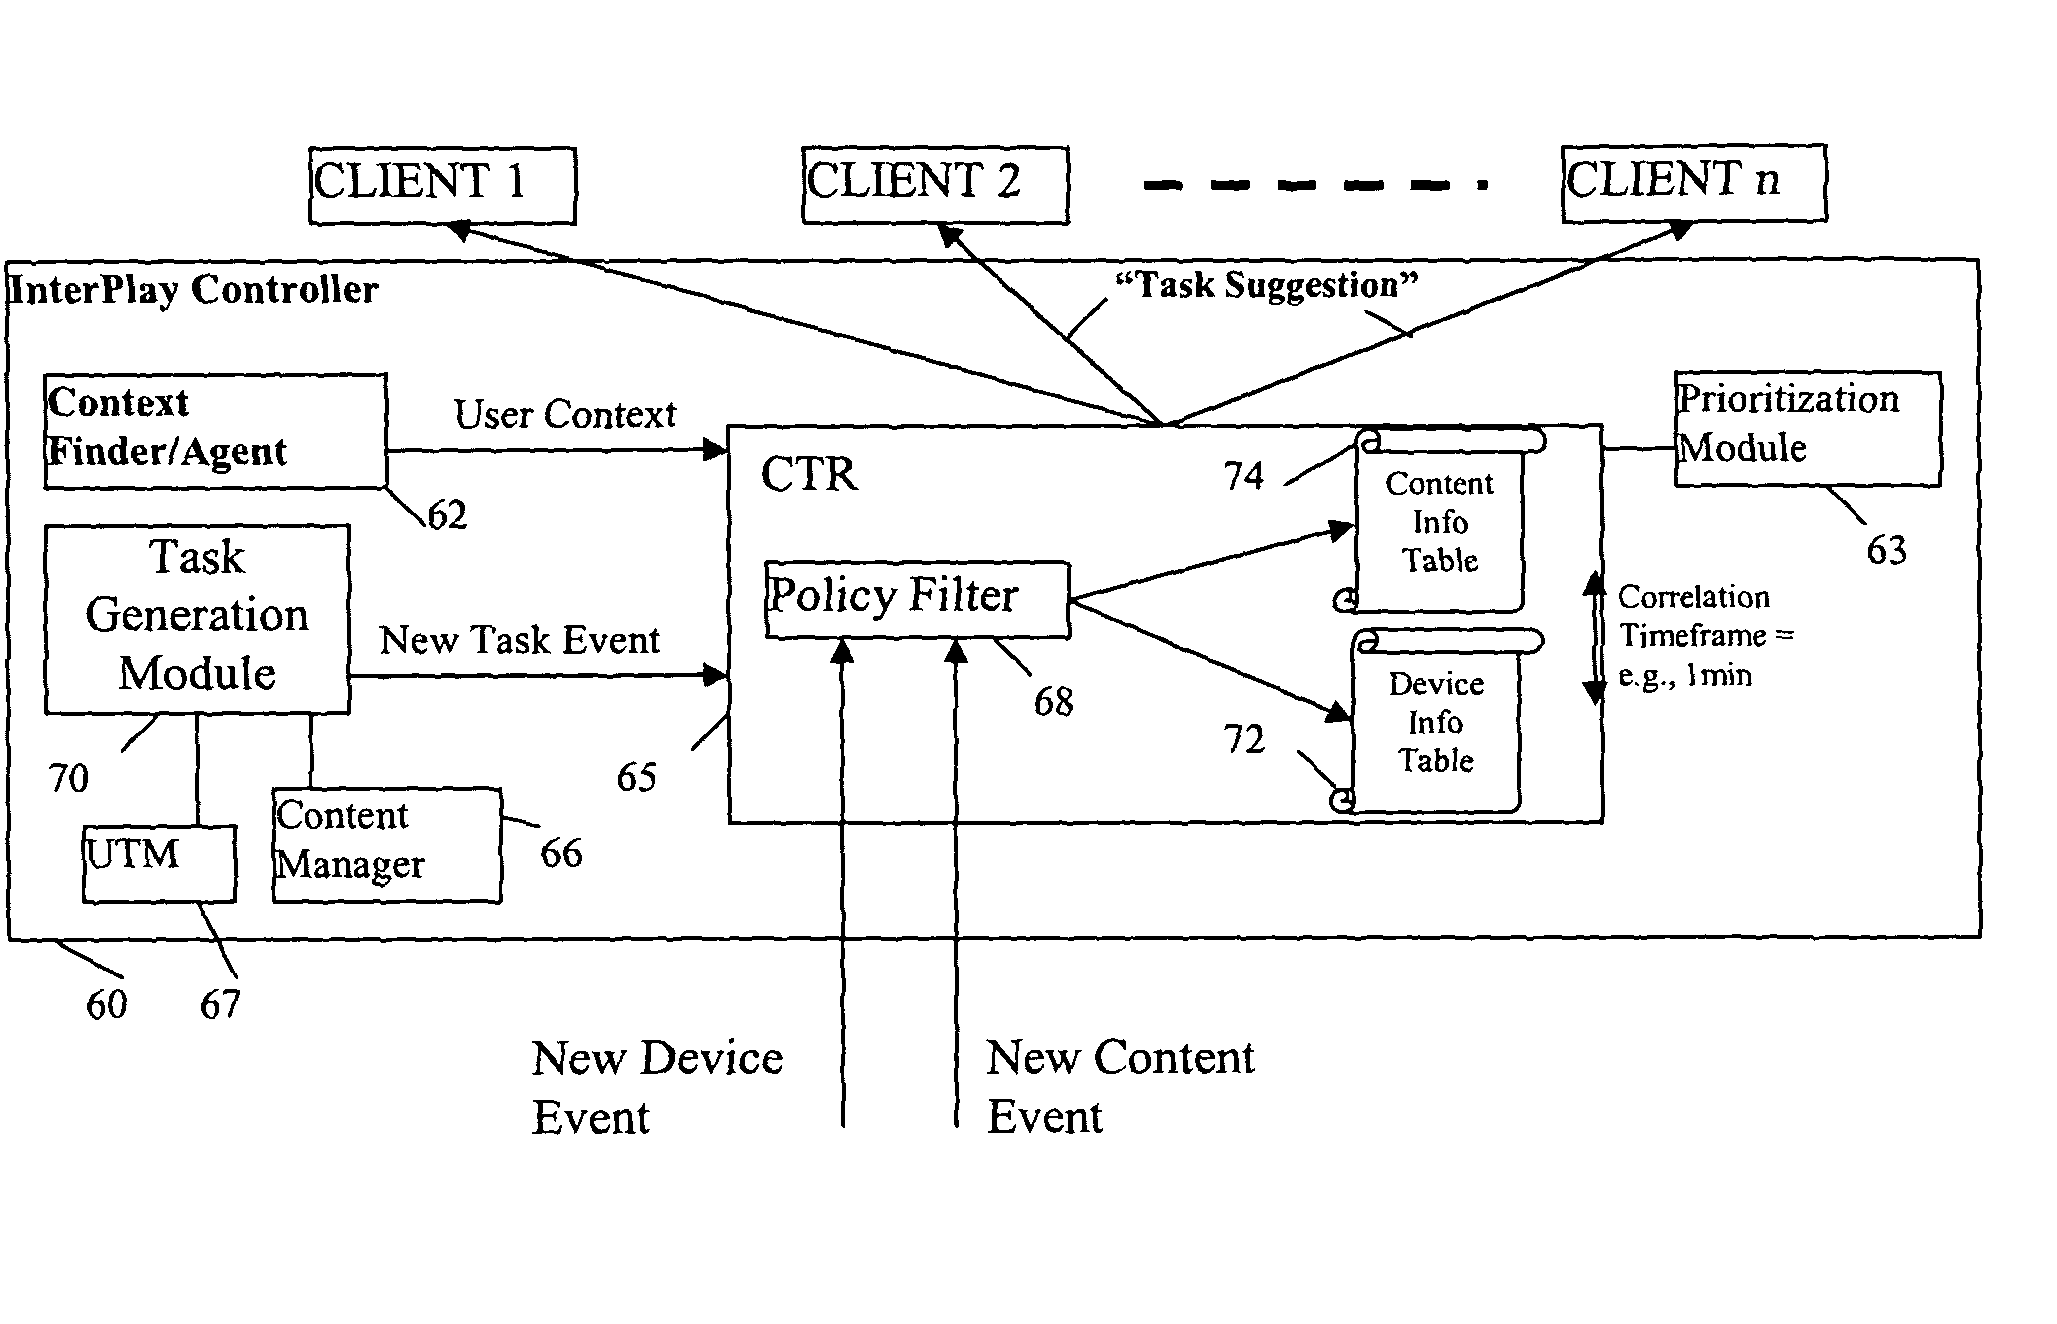 Contextual task recommendation system and method for determining user's context and suggesting tasks